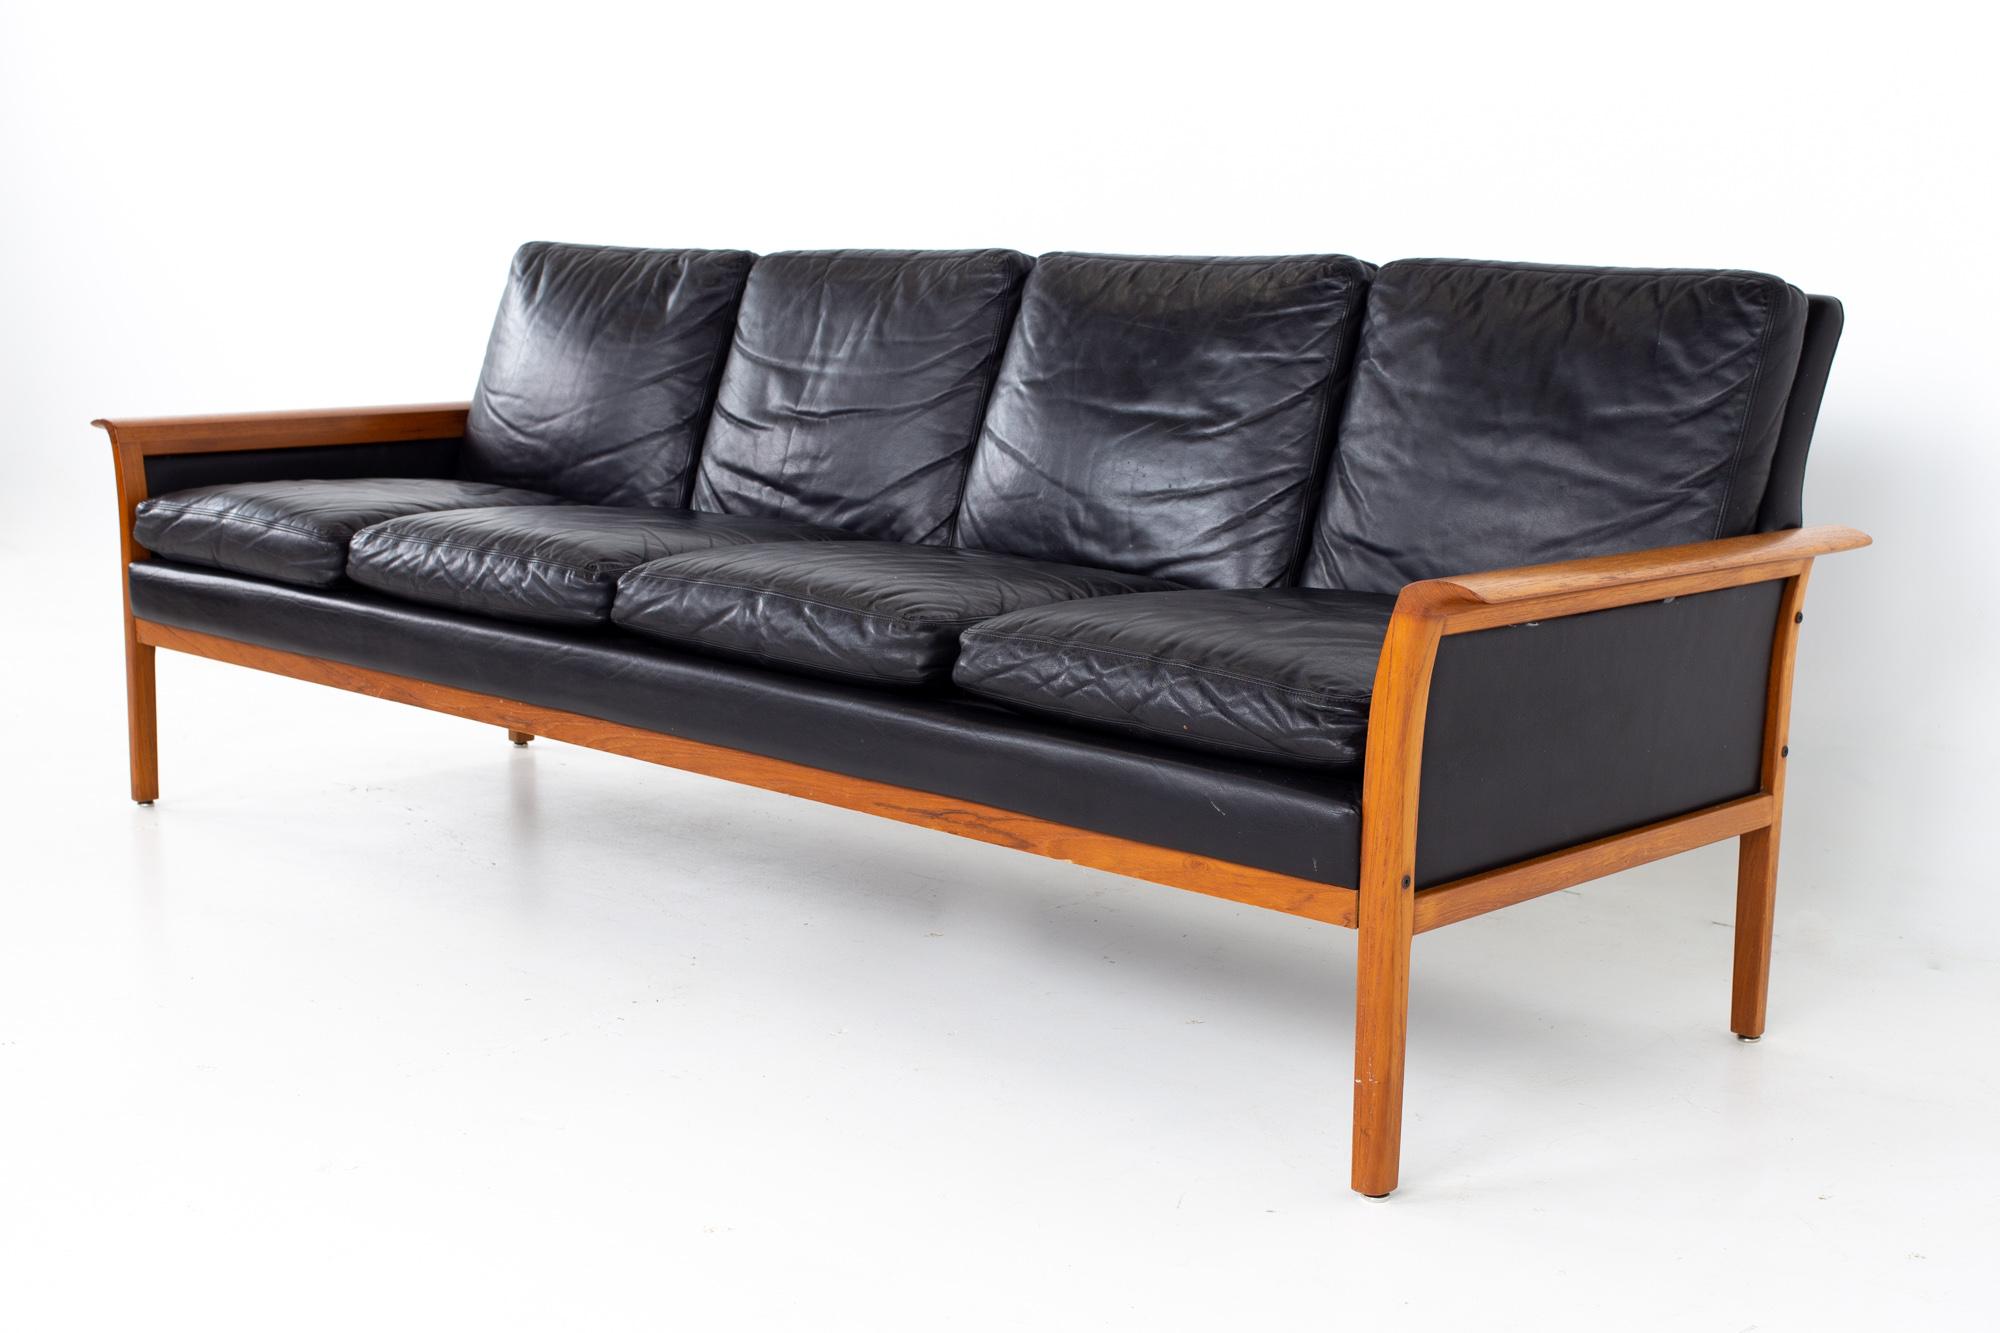 Knut Sæter for Vatne Mobler mid century Danish teak and black leather sofa
Sofa measures: 88 wide x 29.5 deep x 29 high, with a seat height of 16.5 inches

All pieces of furniture can be had in what we call restored vintage condition. That means